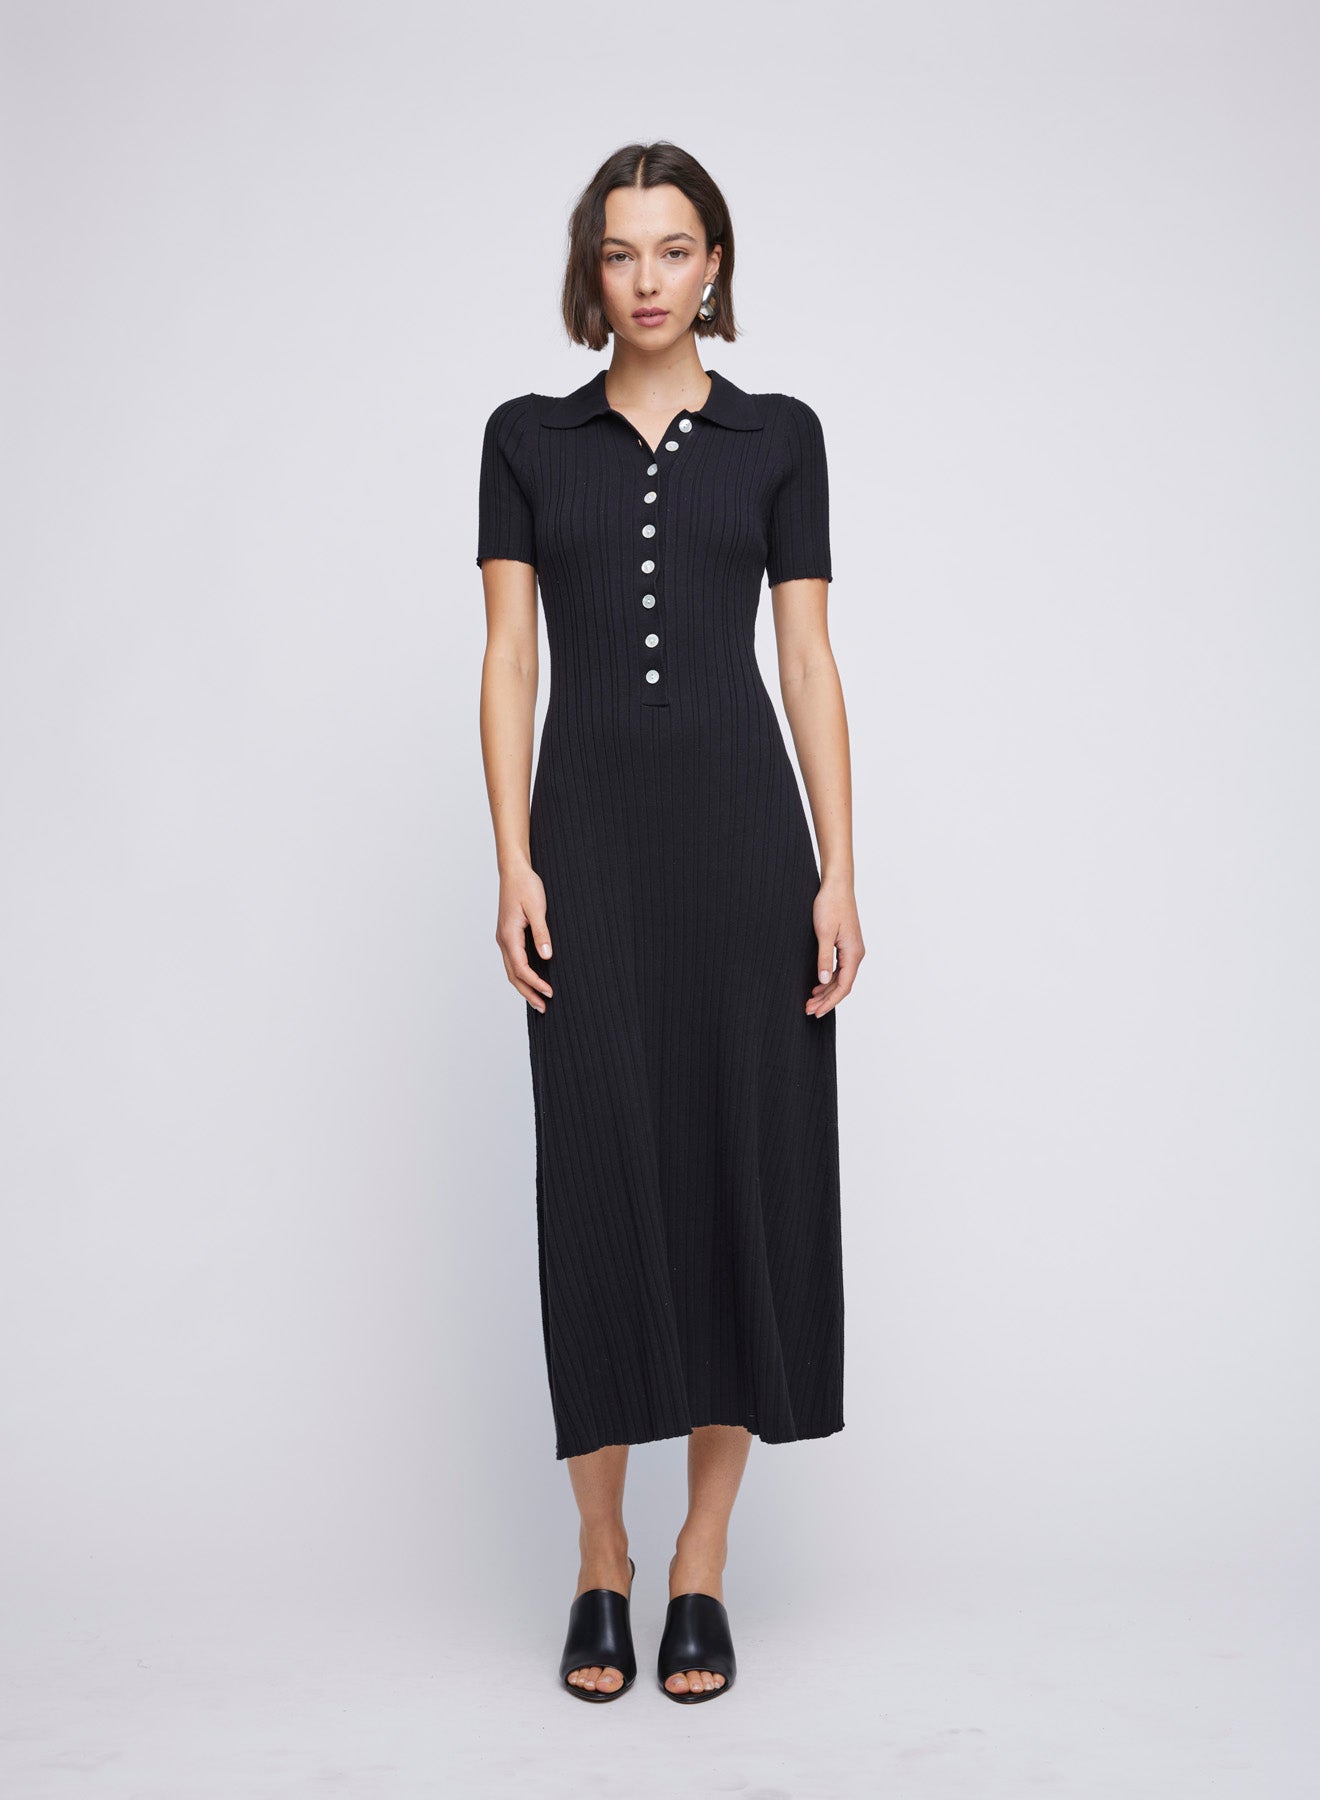 Rib knit cotton maxi dress with polo neckline and contrast buttons